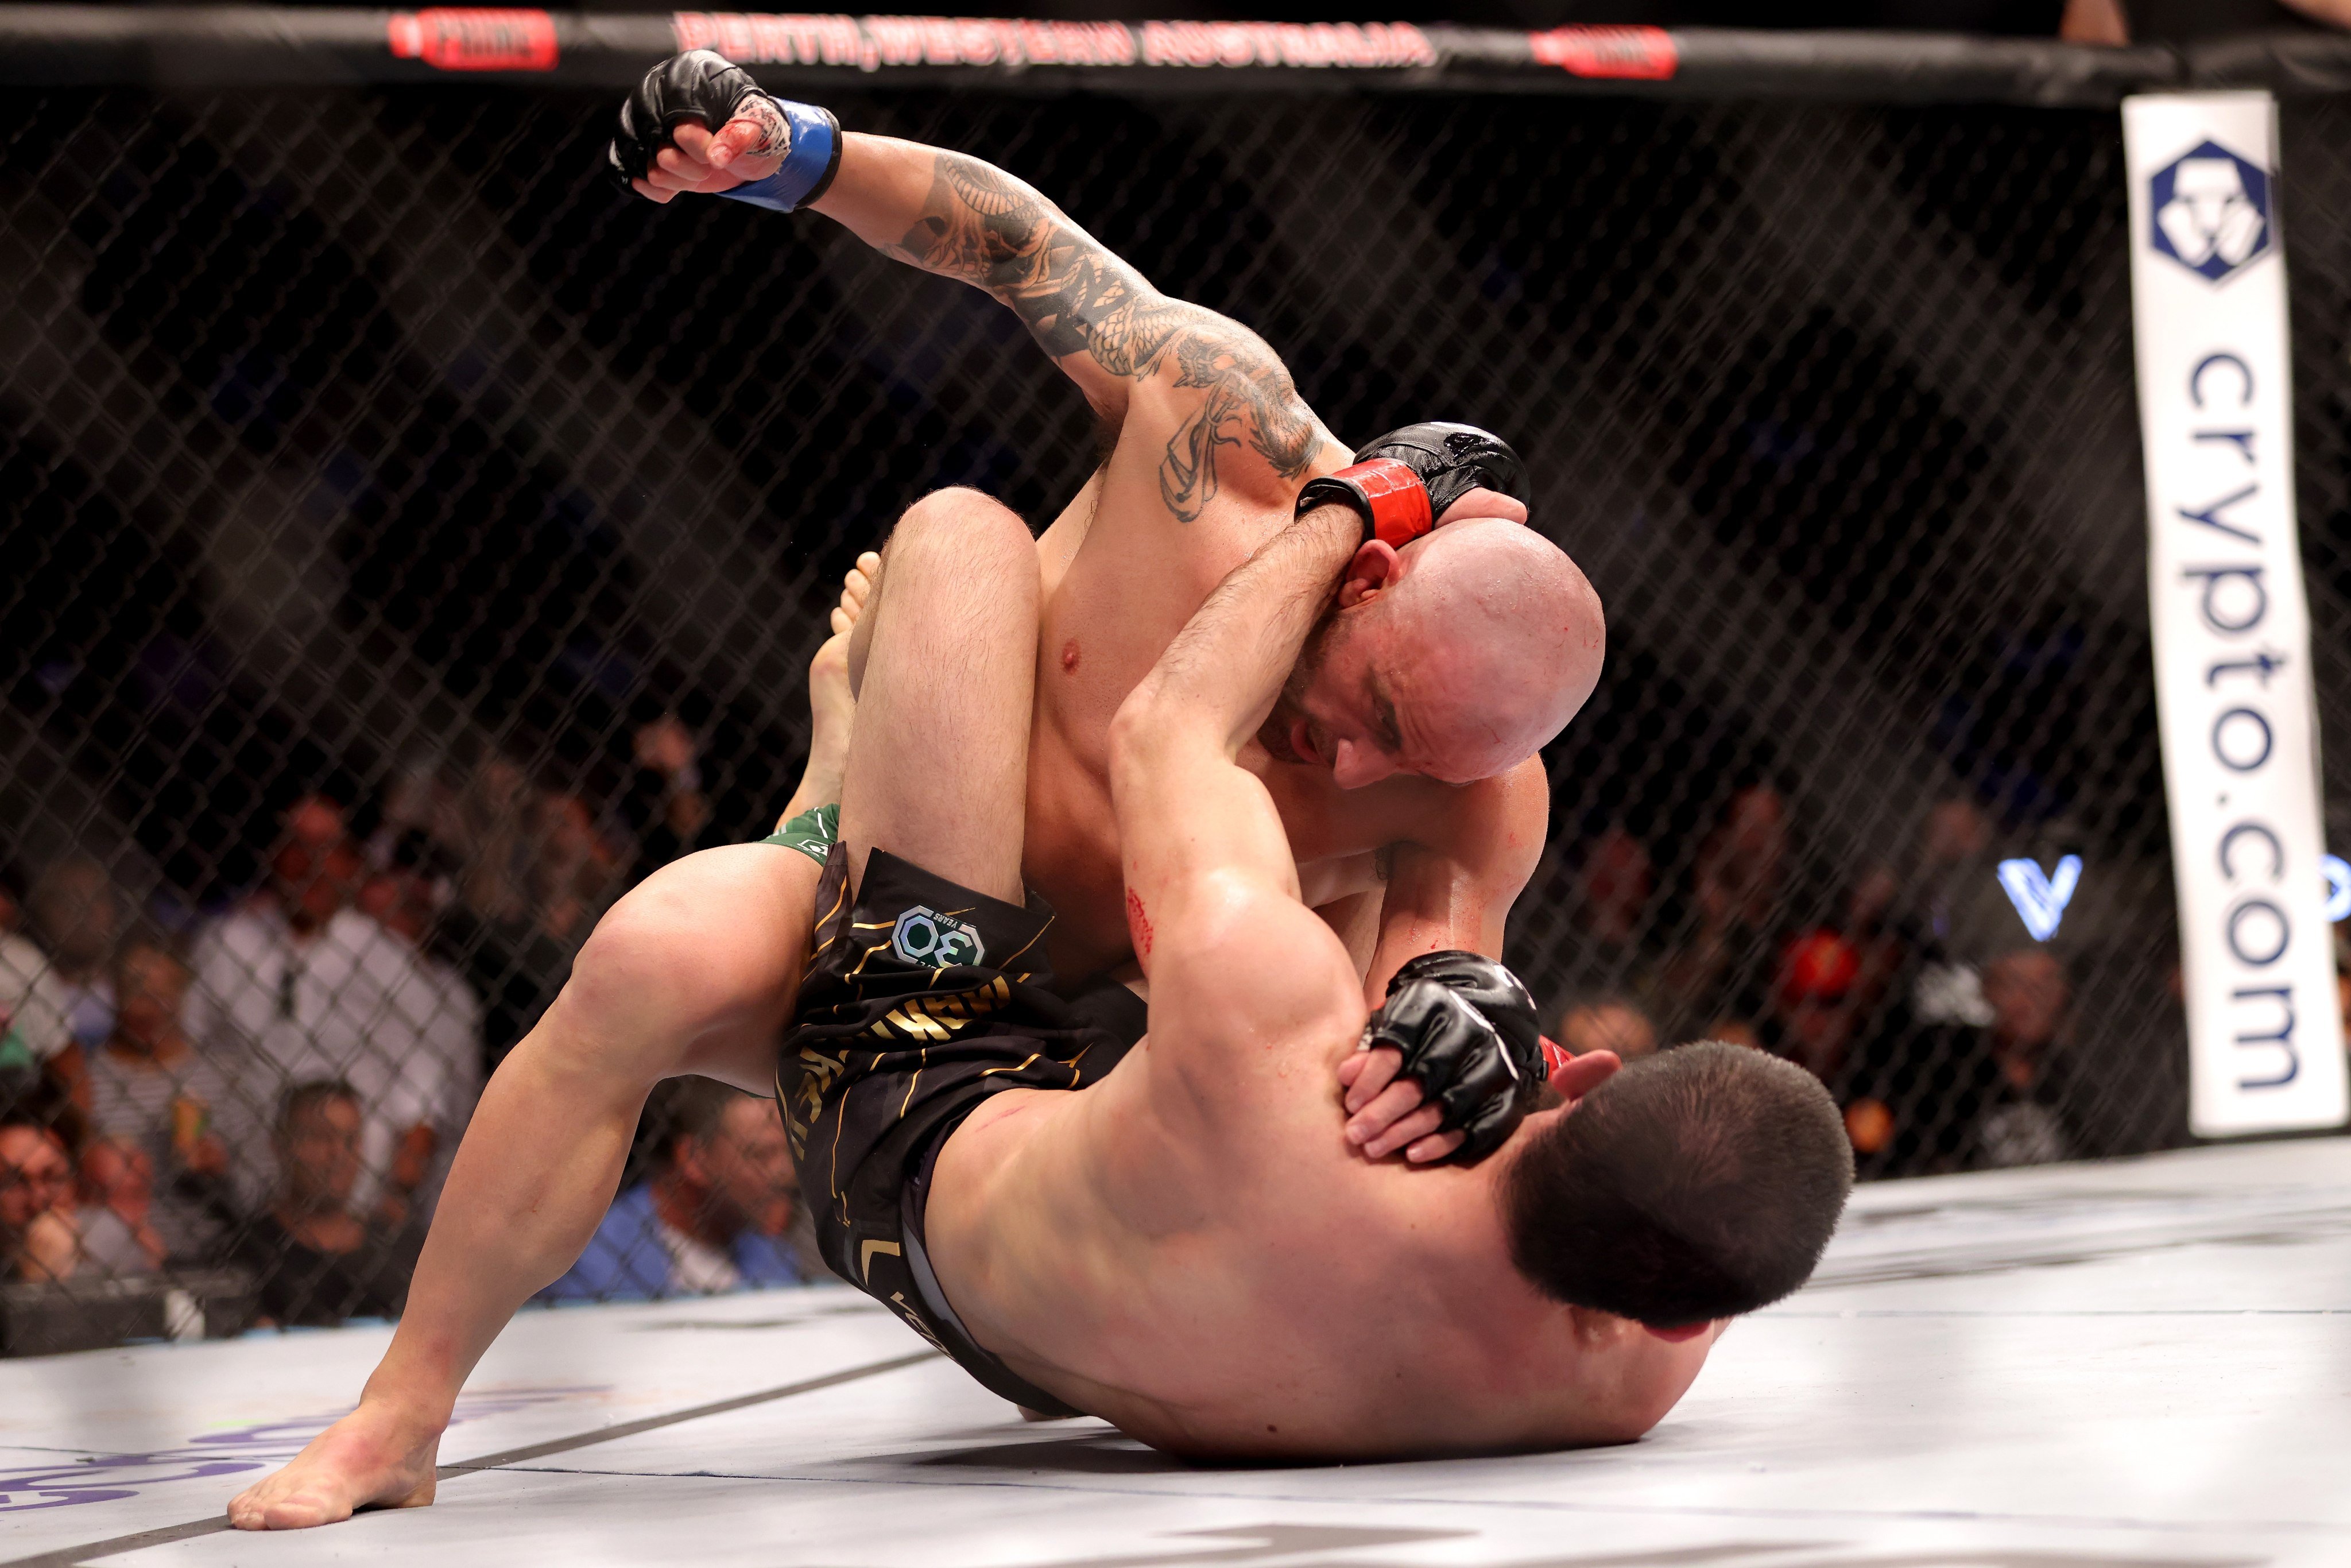 Alex Volkanovski (left) swings at Islam Makhachev during their lightweight title bout at UFC 284. Photo: EPA-EFE